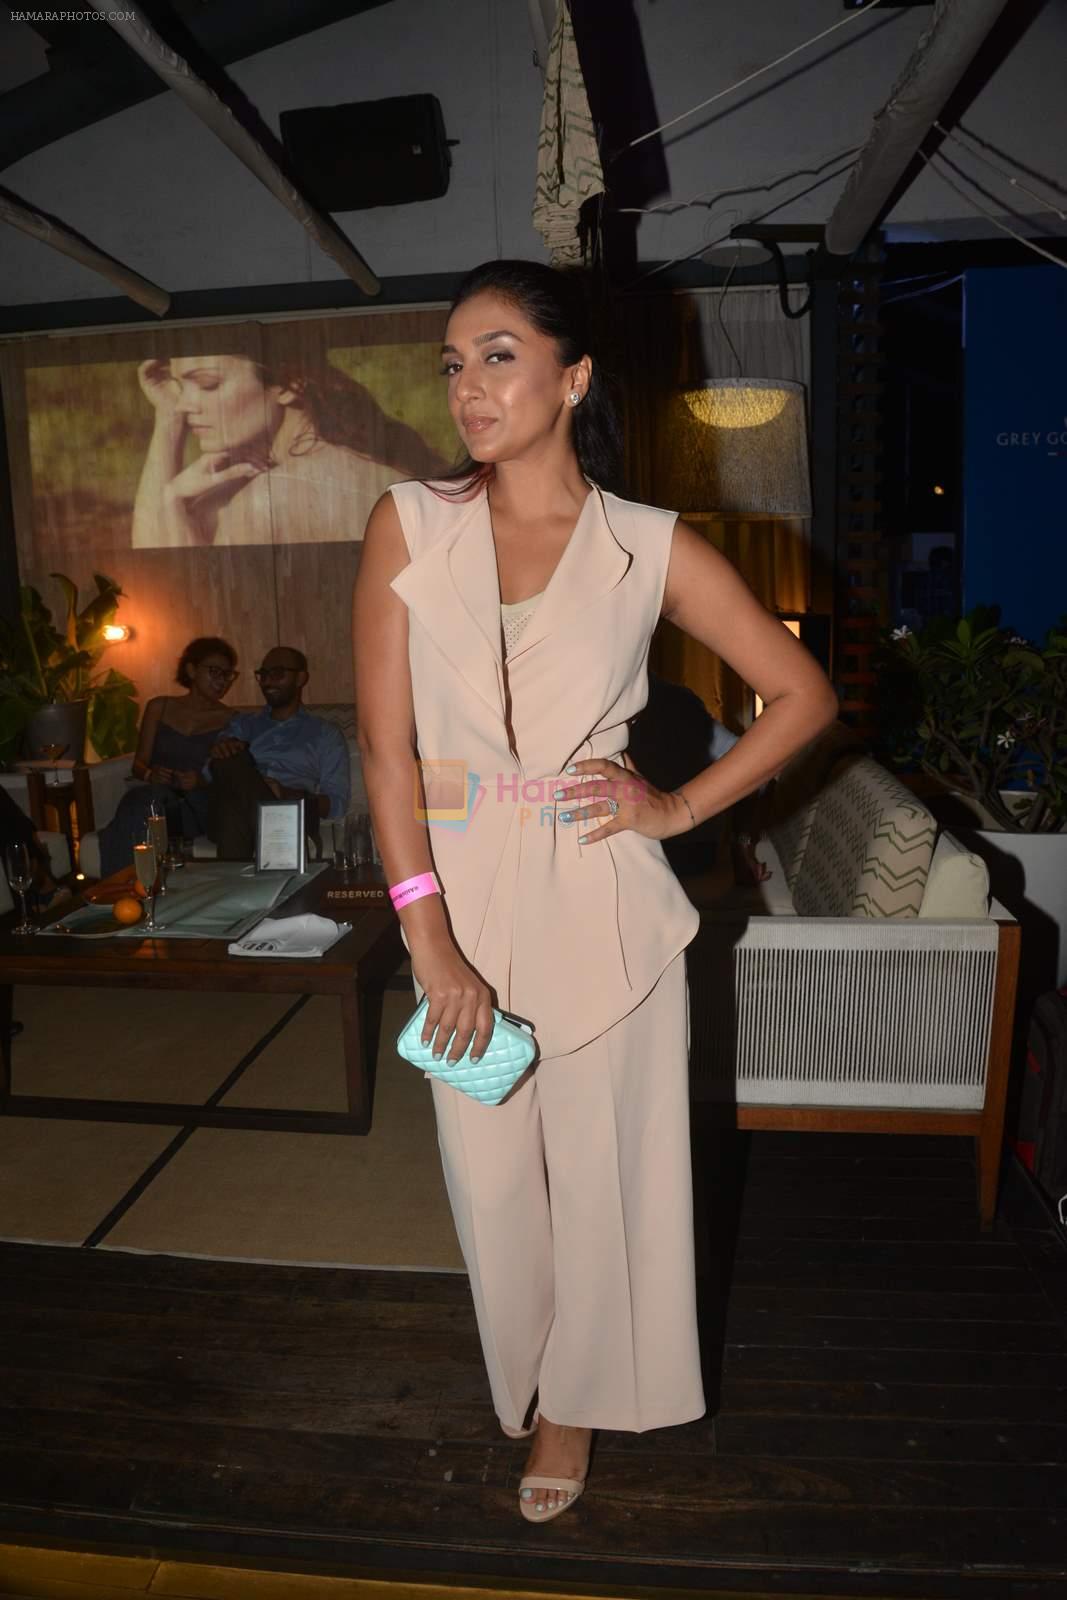 Shweta Salve at Grey Goose Cabana Couture launch in Asilo on 8th May 2015